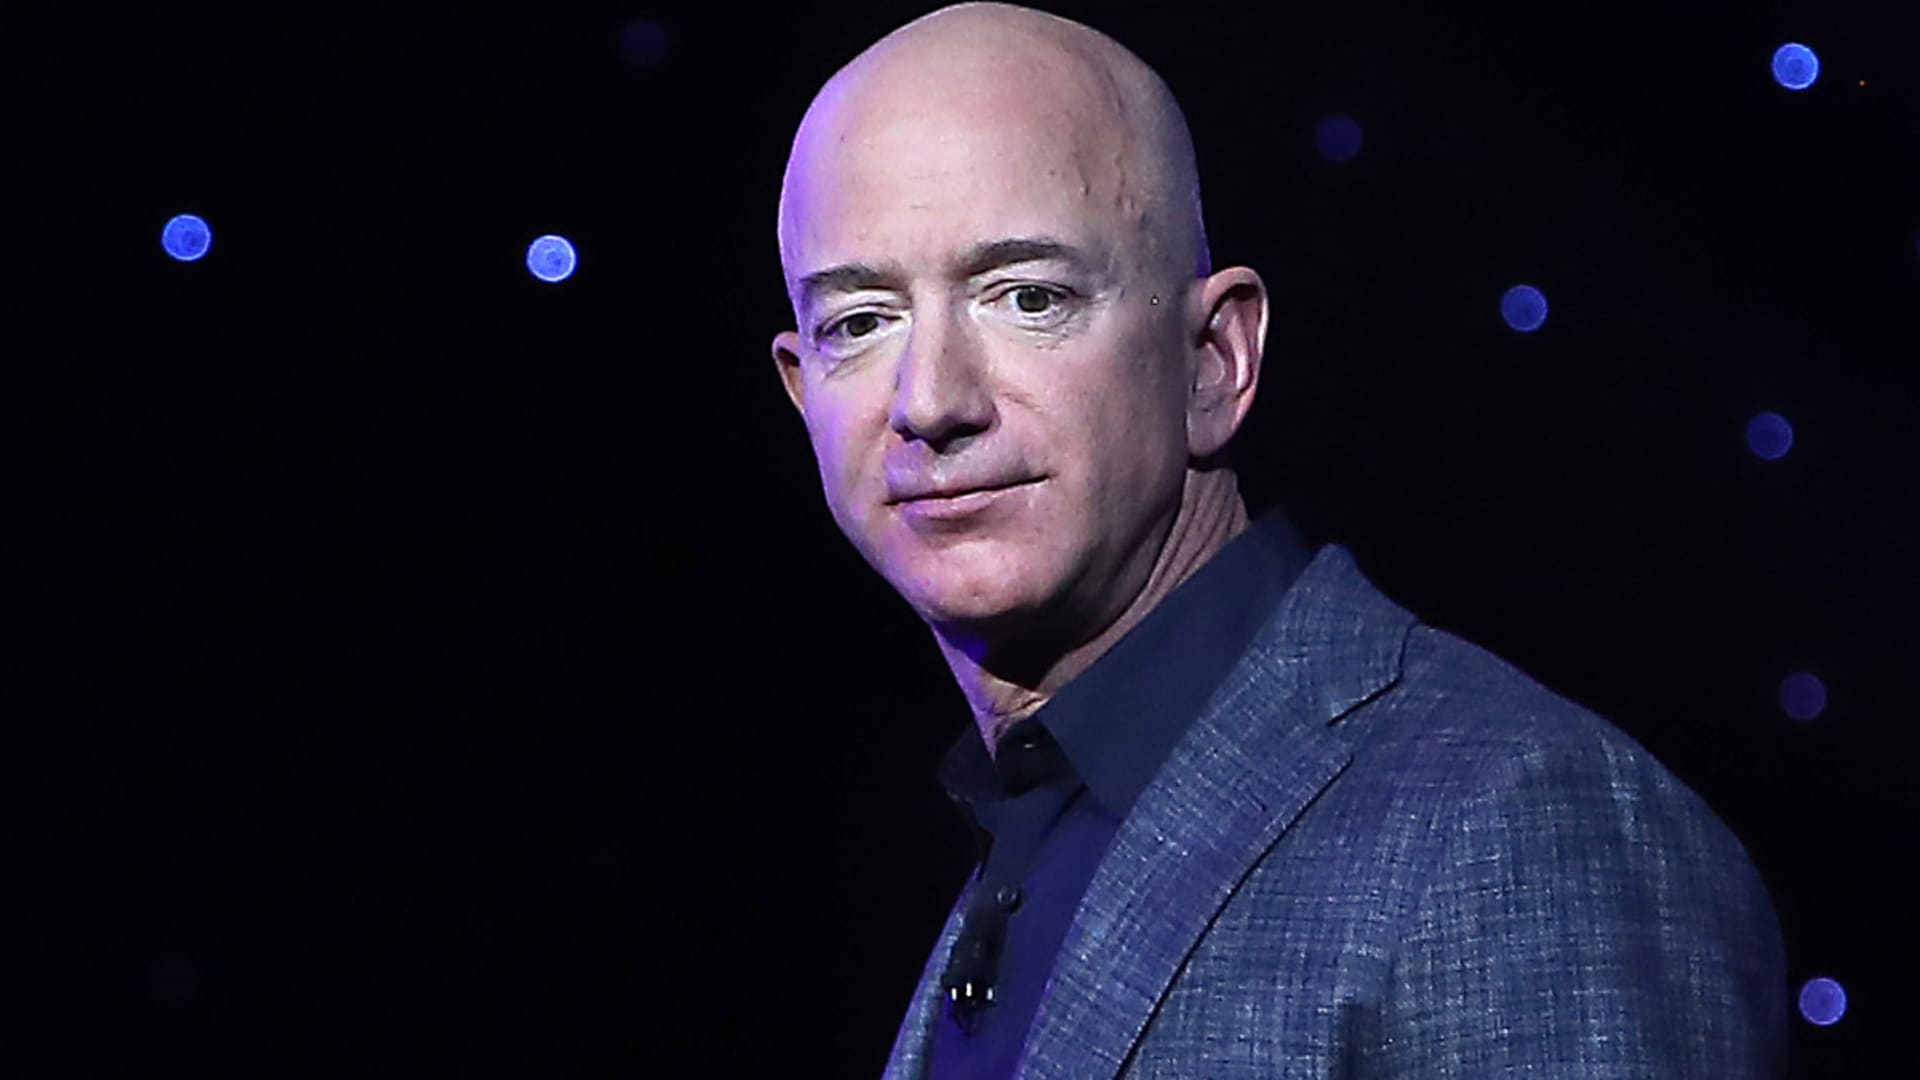 jeff-bezos-sued-by-former-housekeeper-over-working-conditions-discrimination-by-other-staff